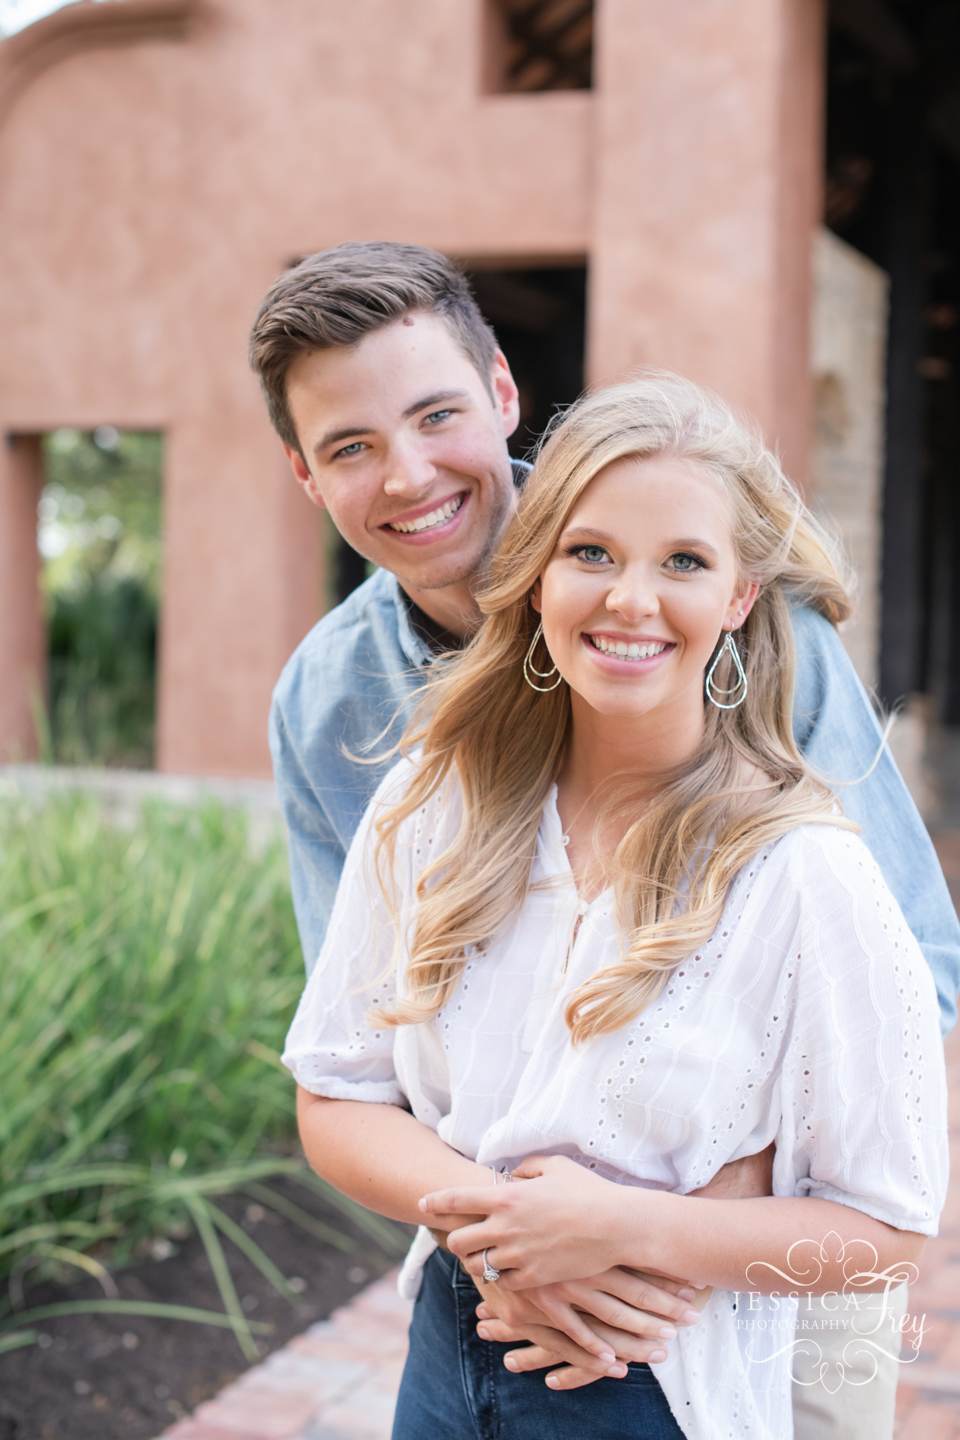 Photographer for engaged couples in Dripping Springs